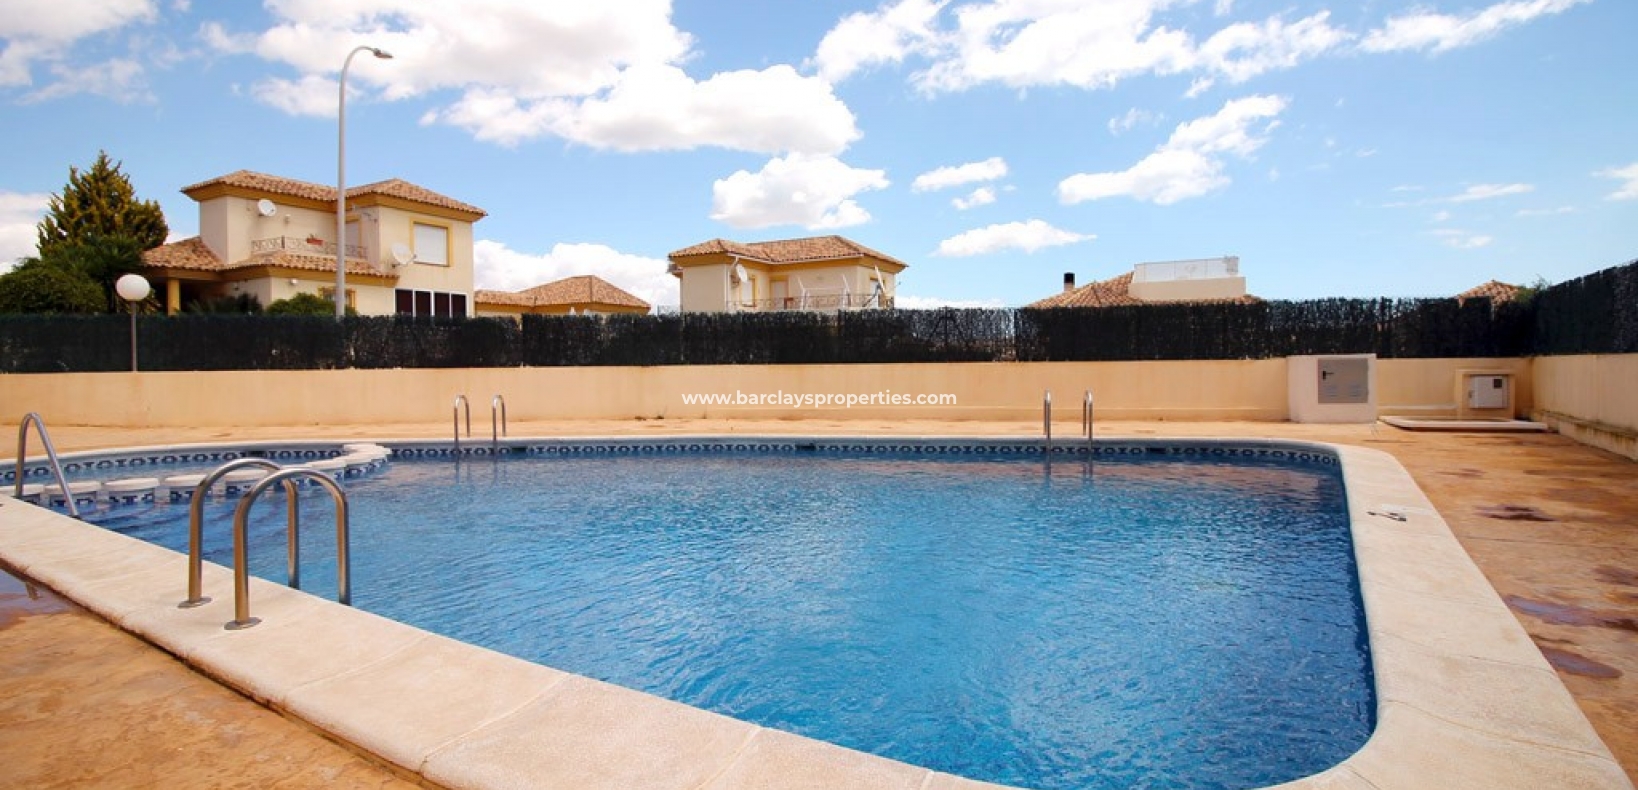 Town House Style Property for Sale in La Marina, Alicante Spain. - swimming pool